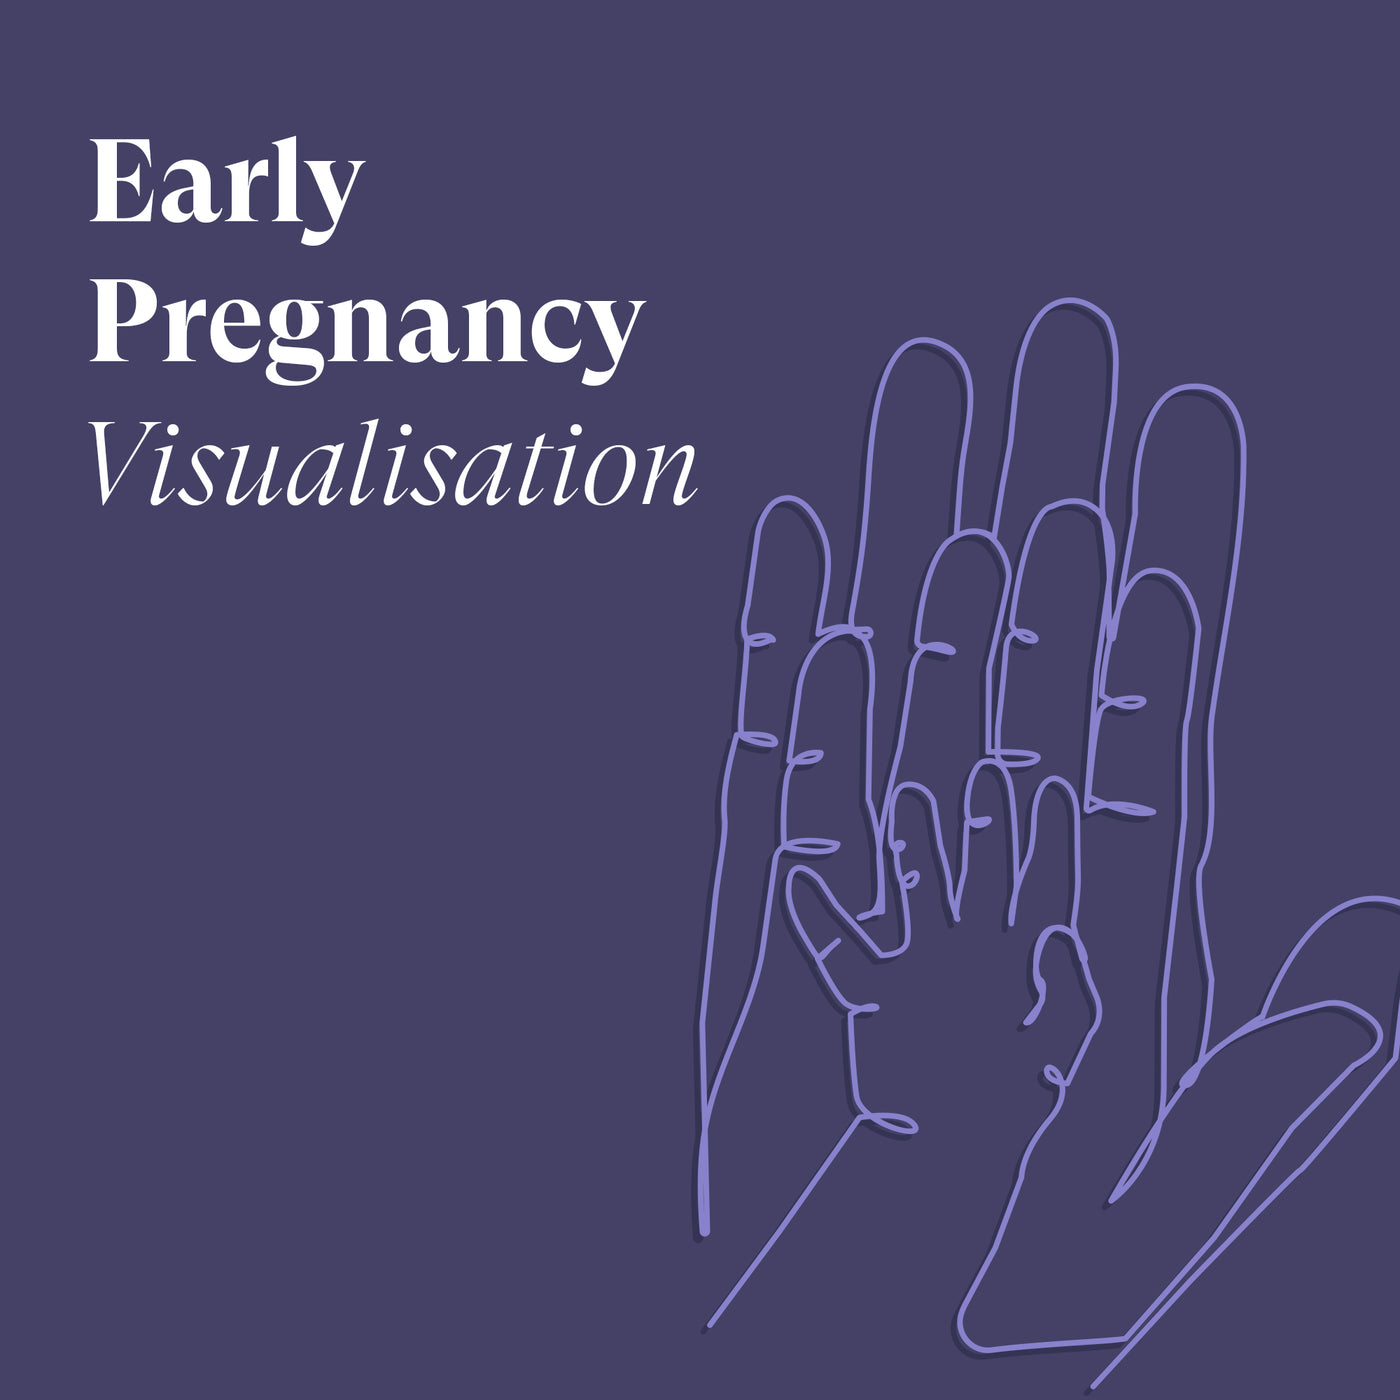 Early Pregnancy Visualisation